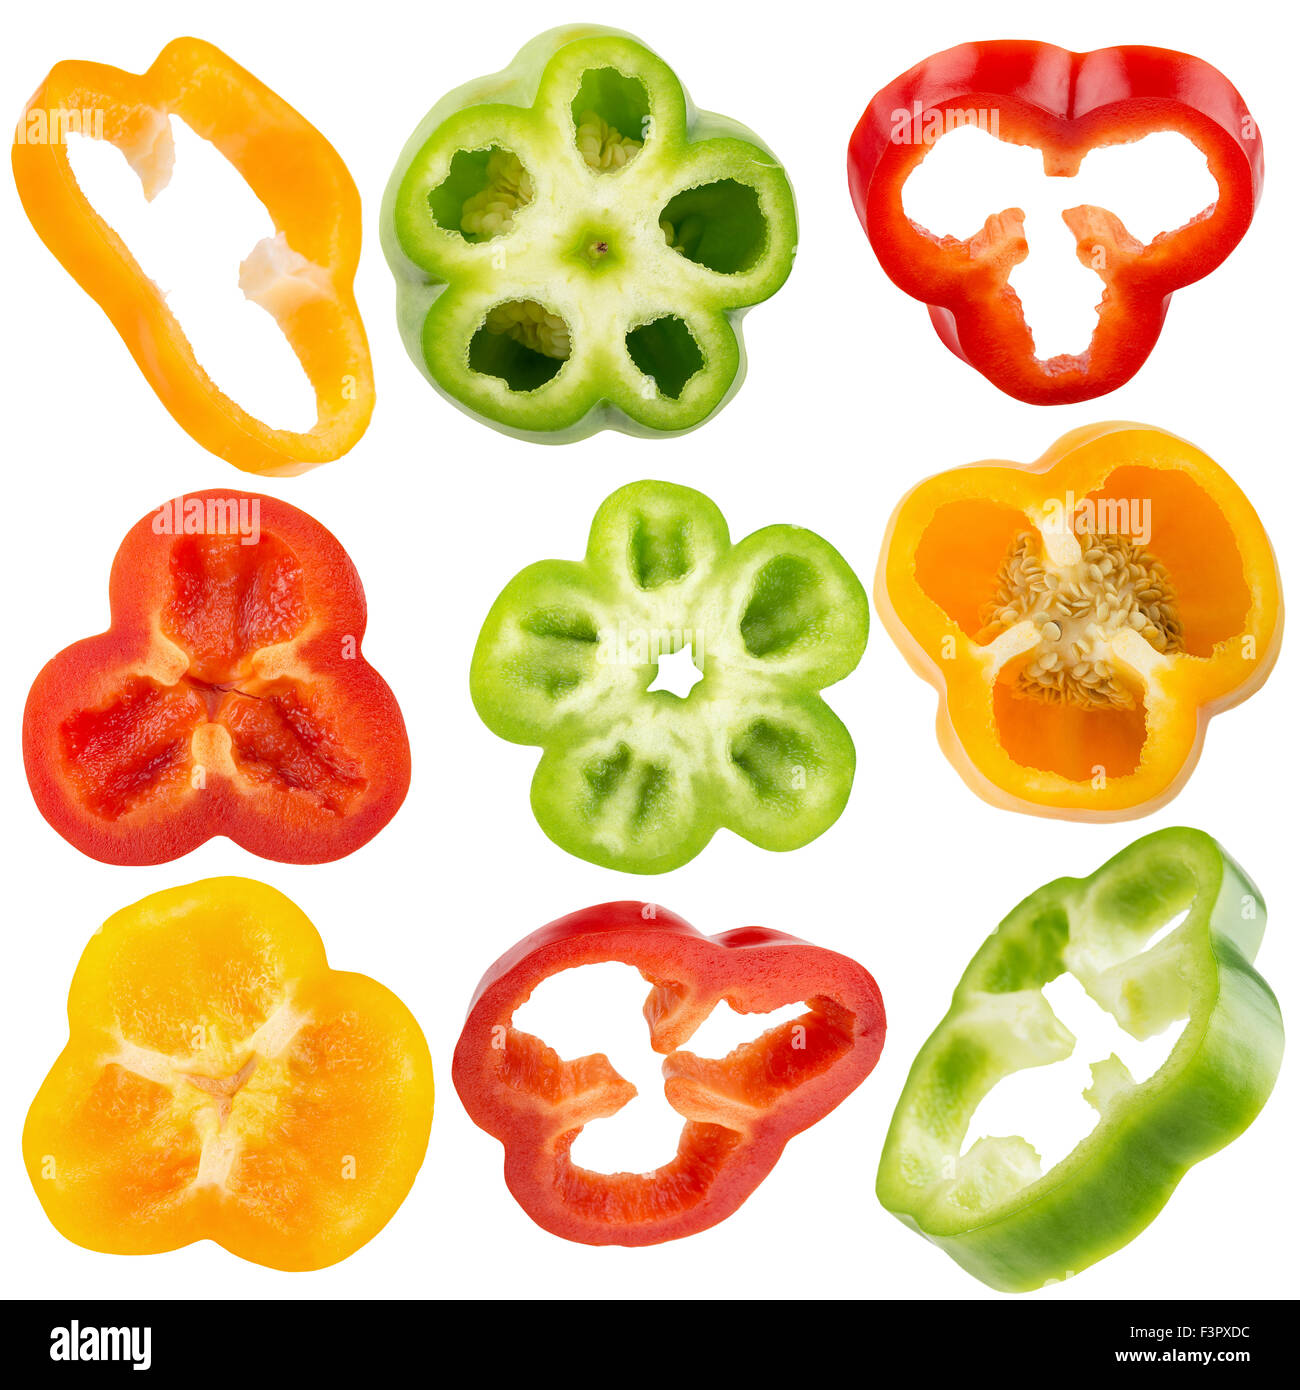 collection of red, yellow, green pepper slices isolated on the white background. Stock Photo